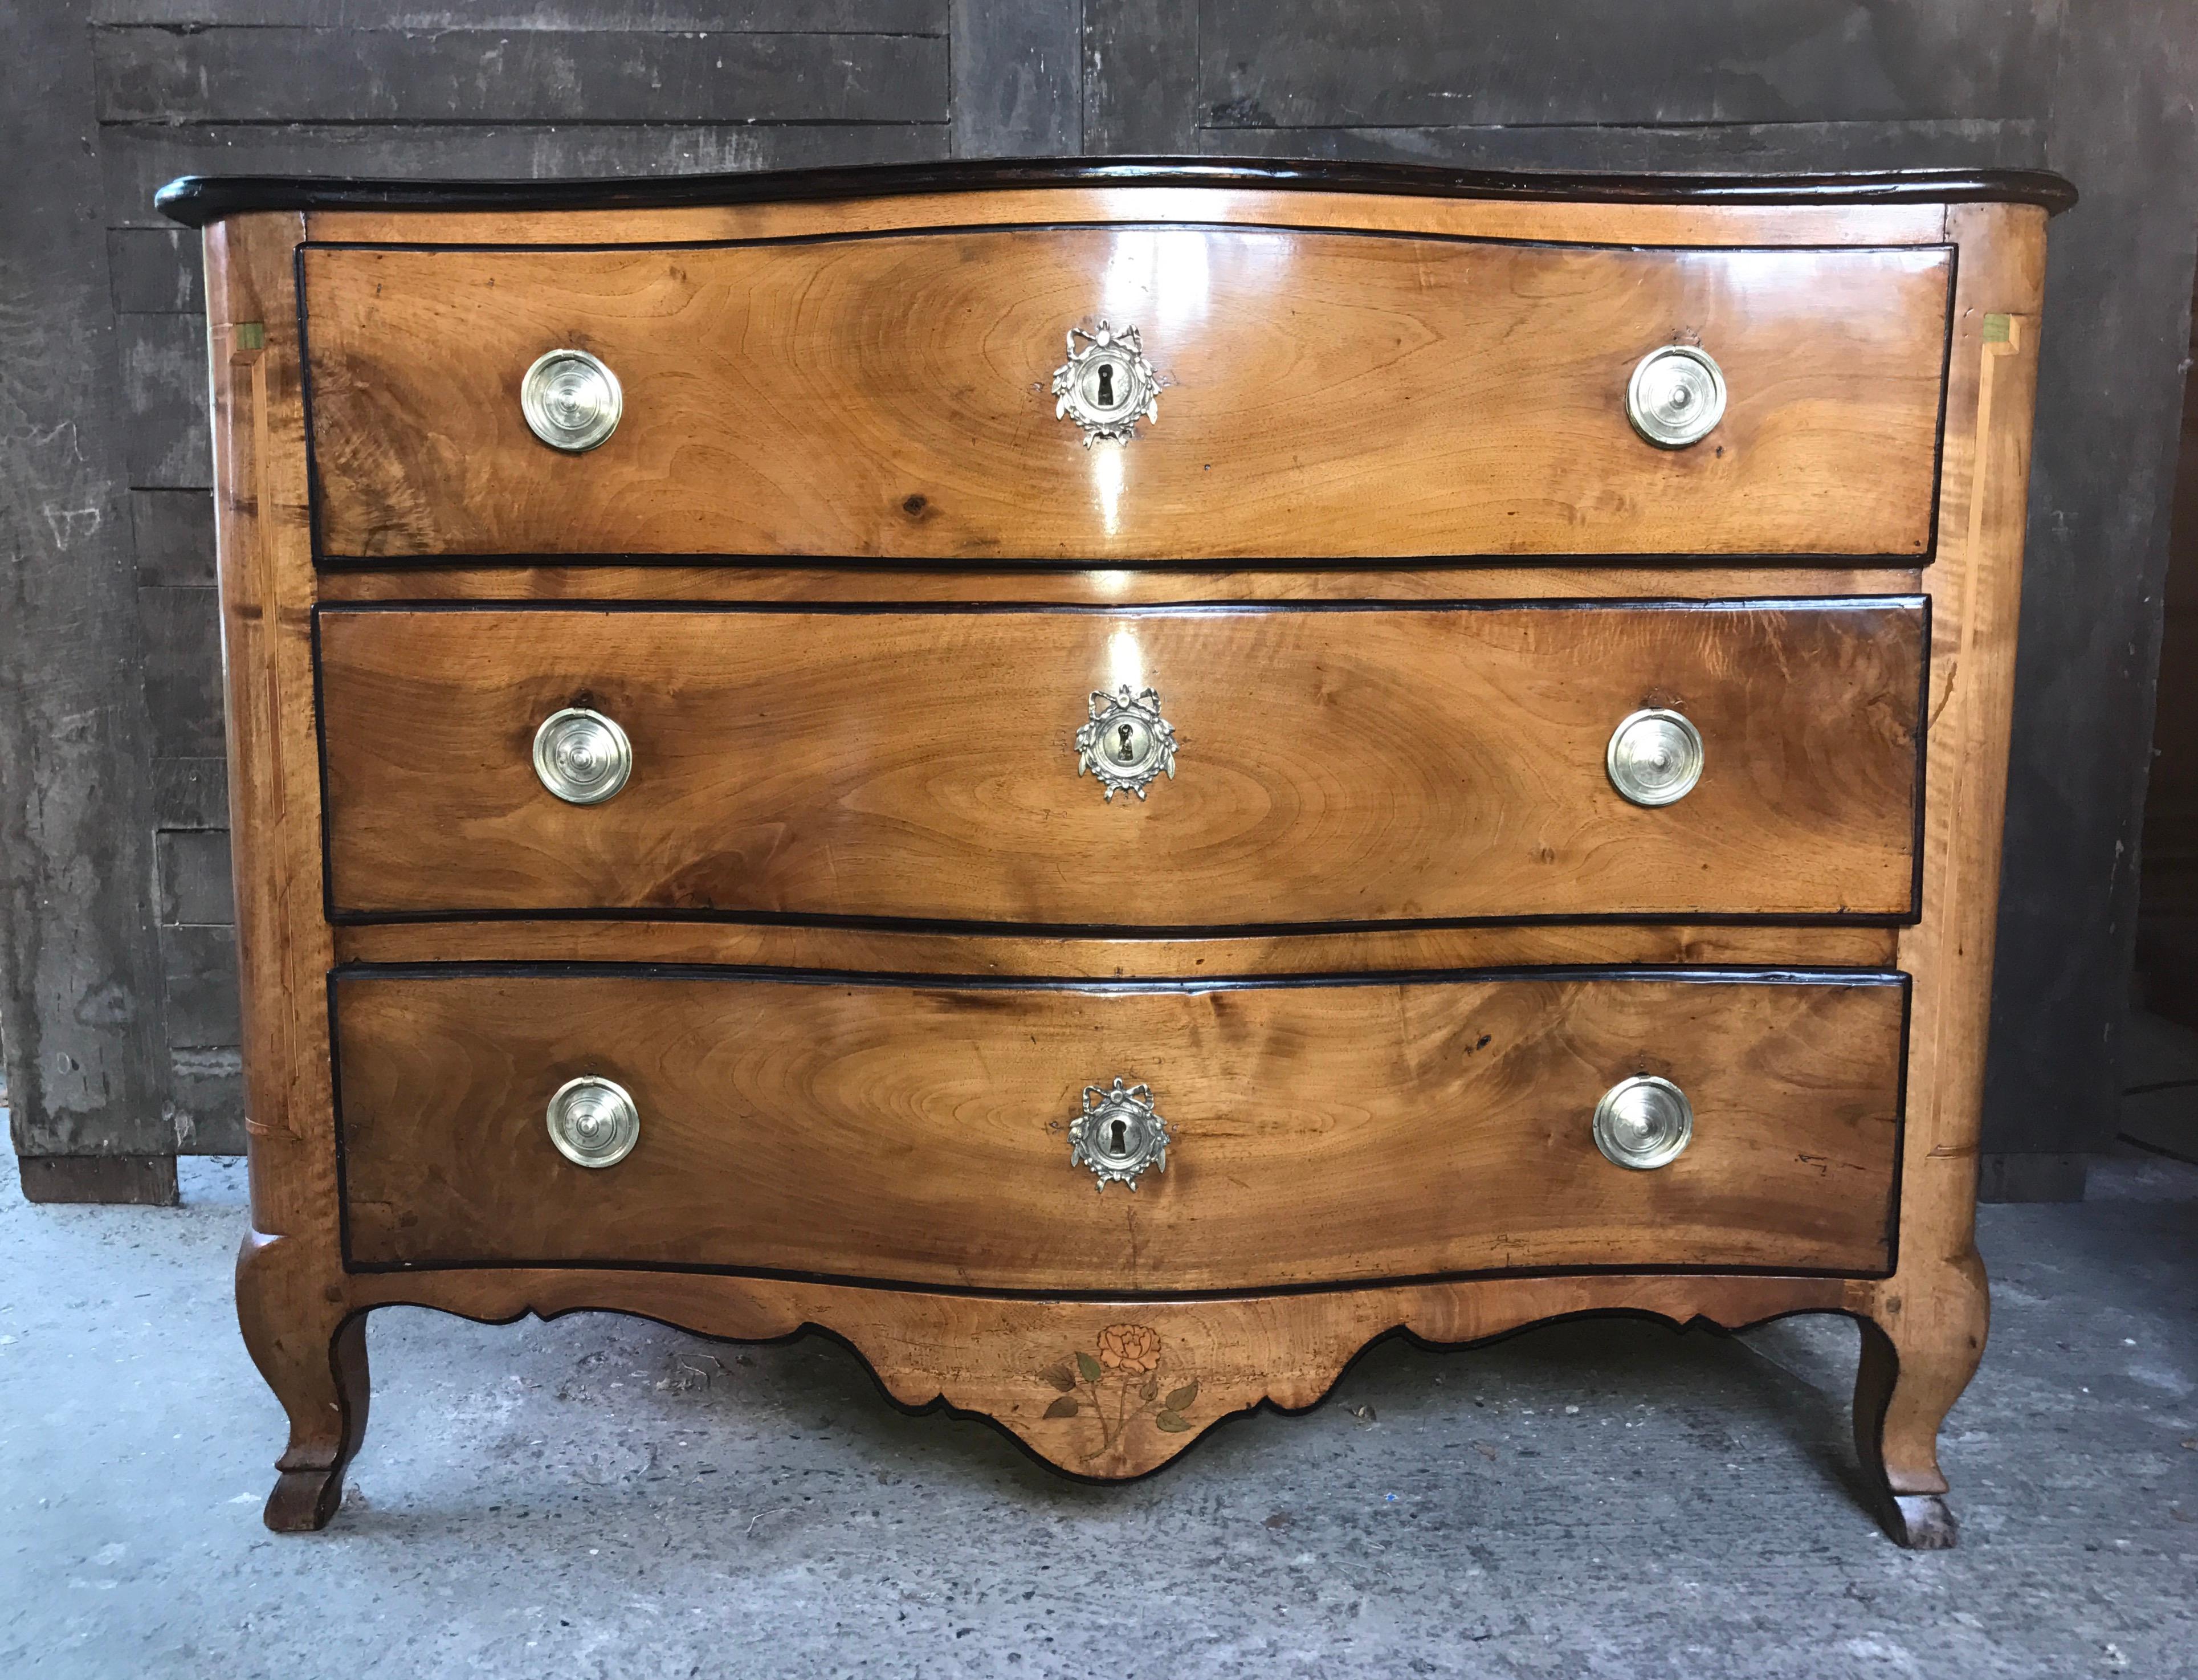 Louis XV chest of drawers attributes to Hache
Walnut opening with three drawers facade triple curves, rounded amounts front, smooth sides, feet pellet in the front, wood top.
Handles and lock entries in gilt bronze posterior.
Restorations of use